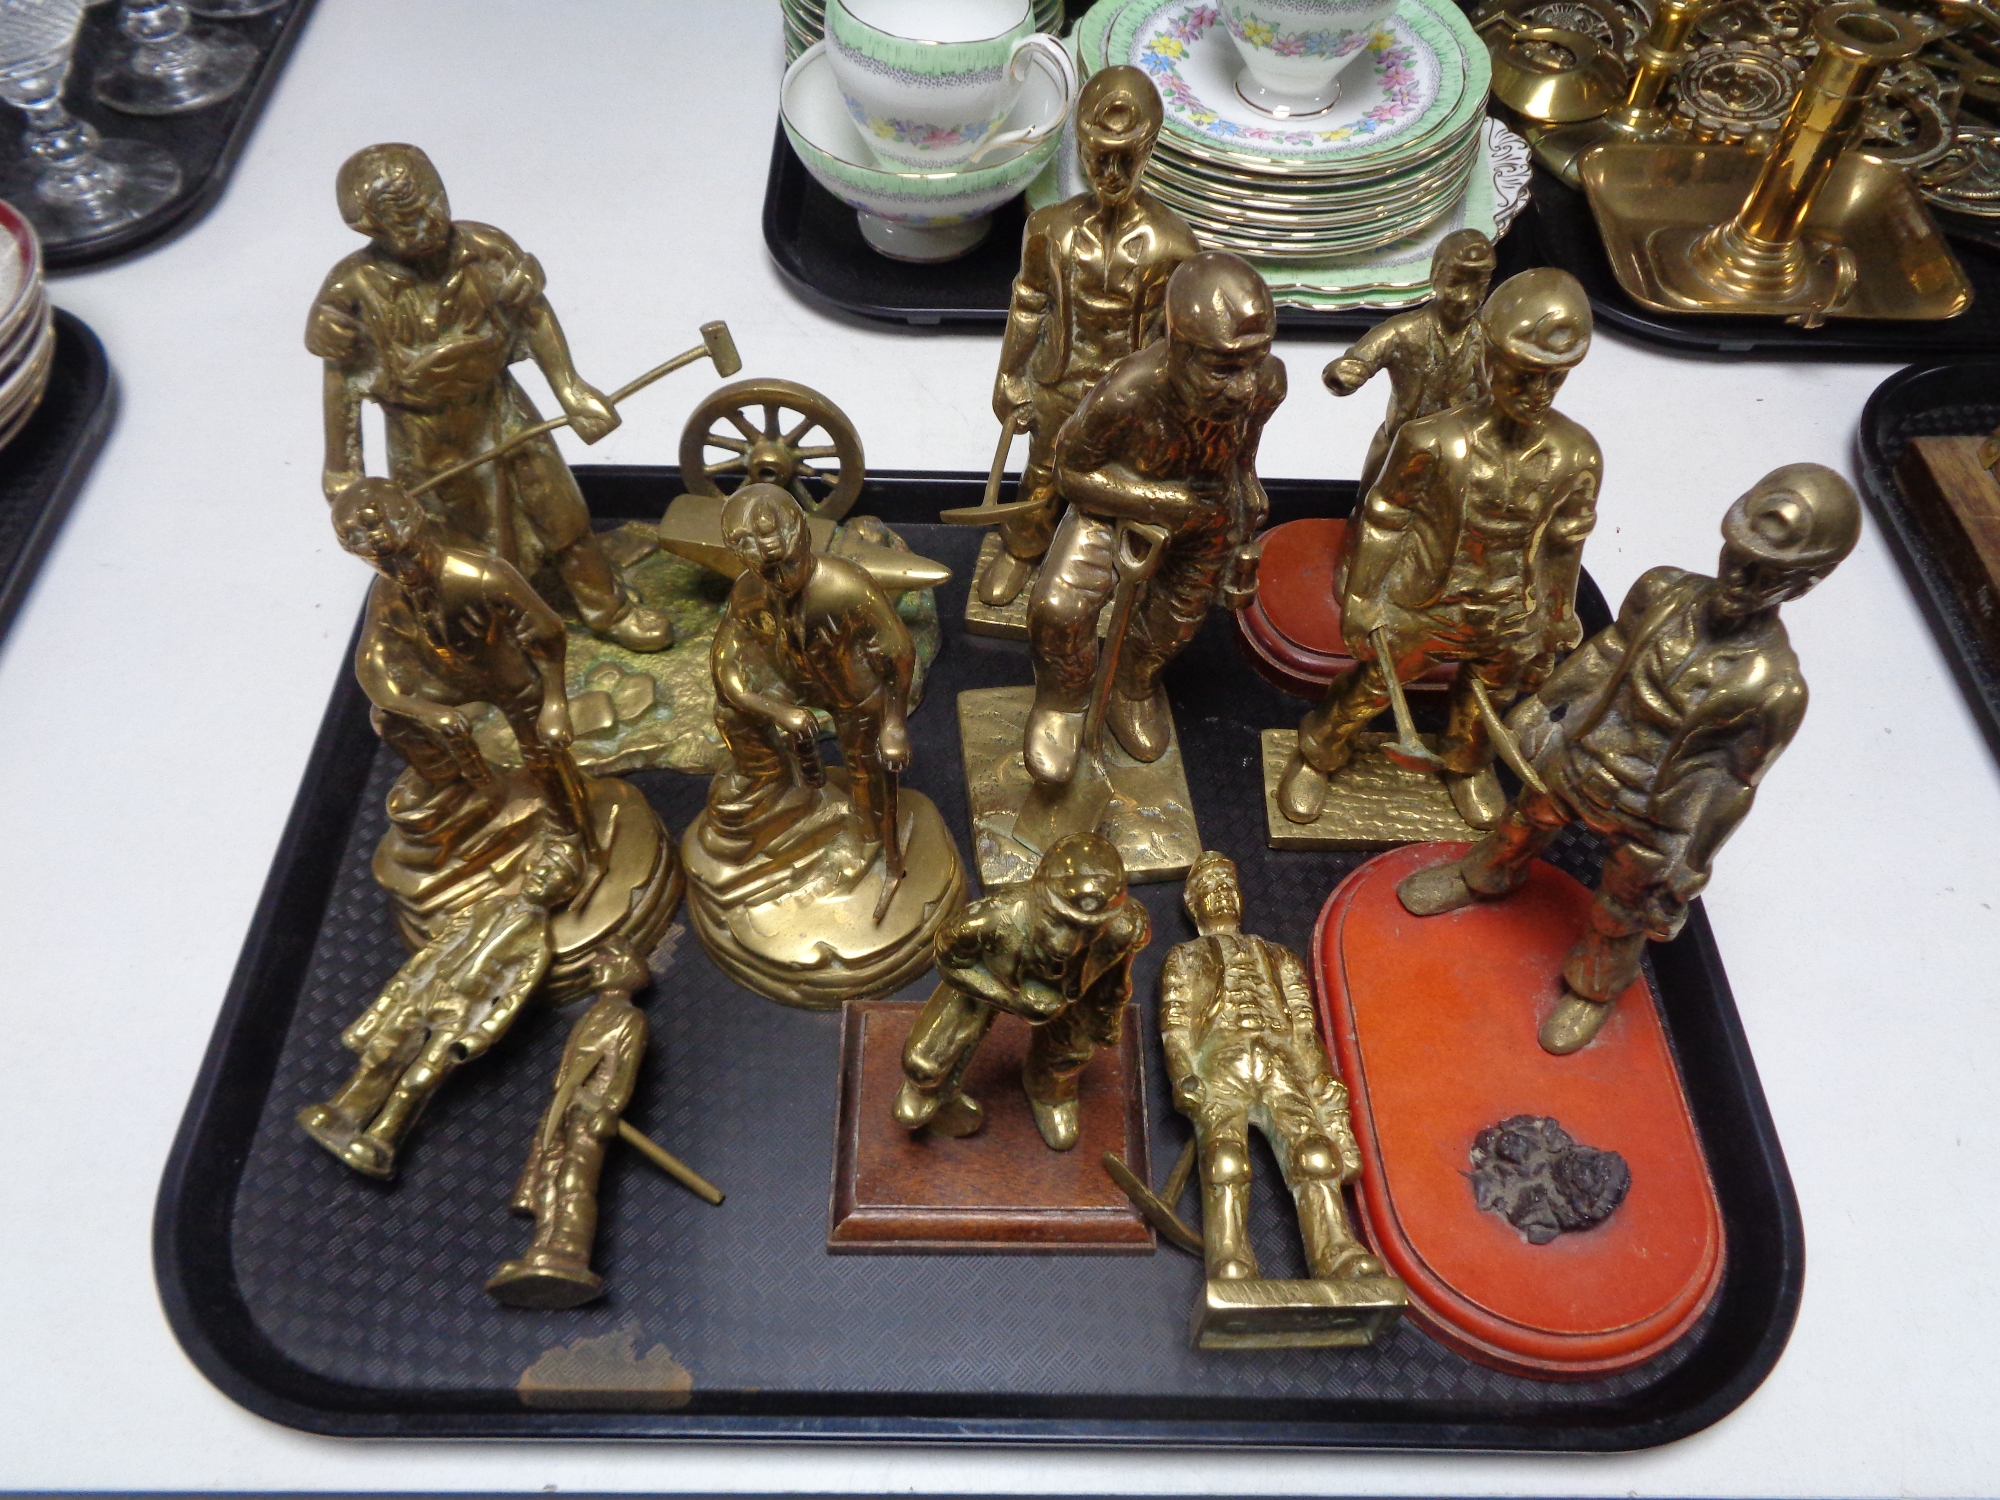 A tray containing brass figures of miners.